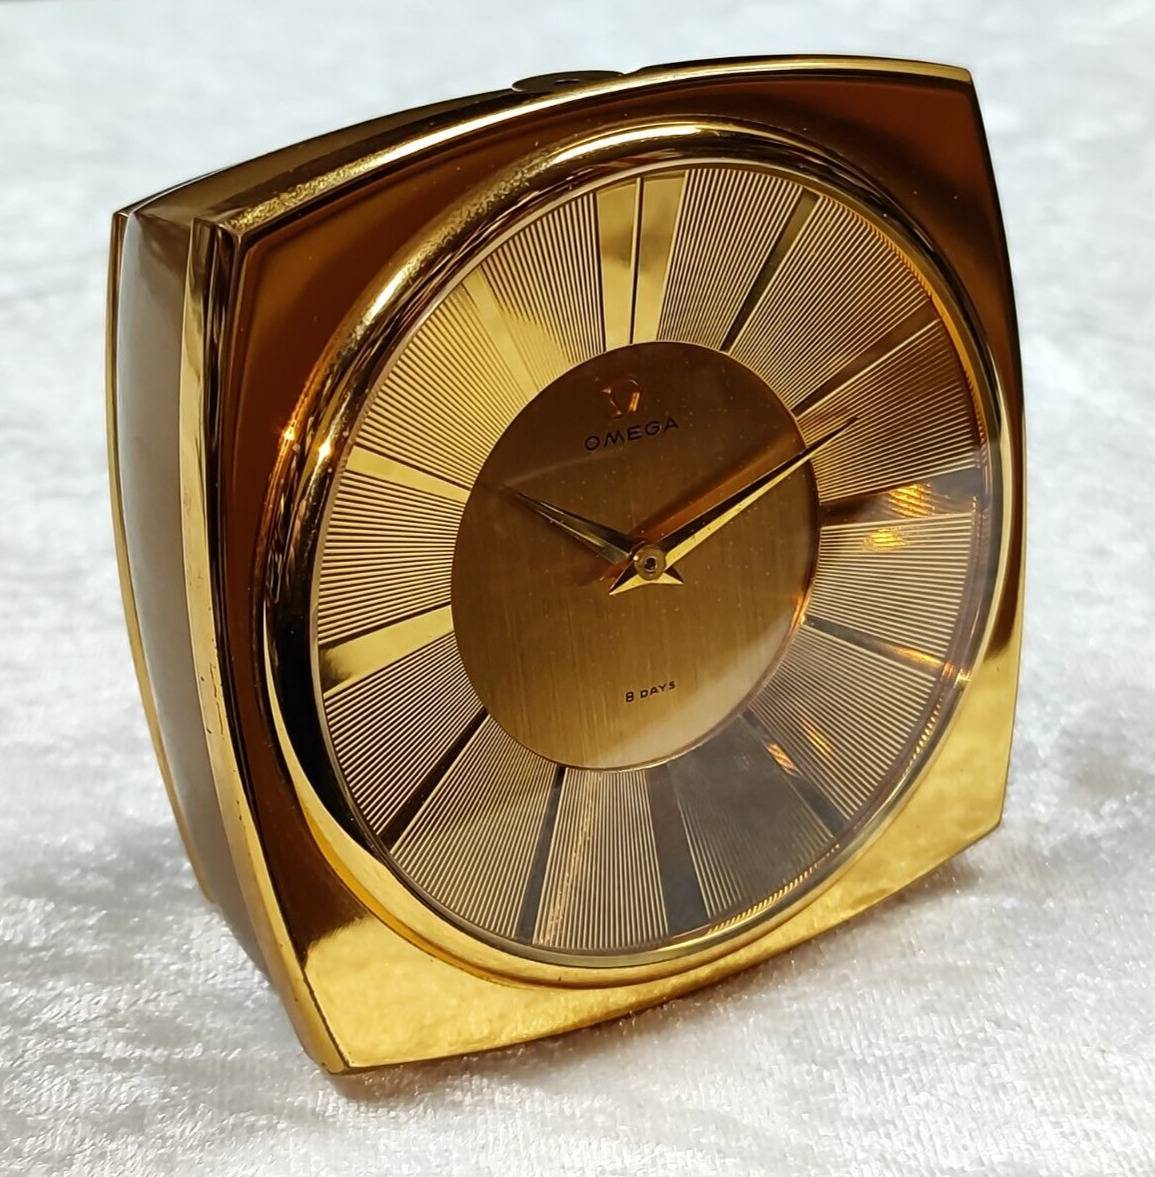 EXTREMELY RARE OMEGA TABLE CLOCK FROM 1960   1400 GRAMS 